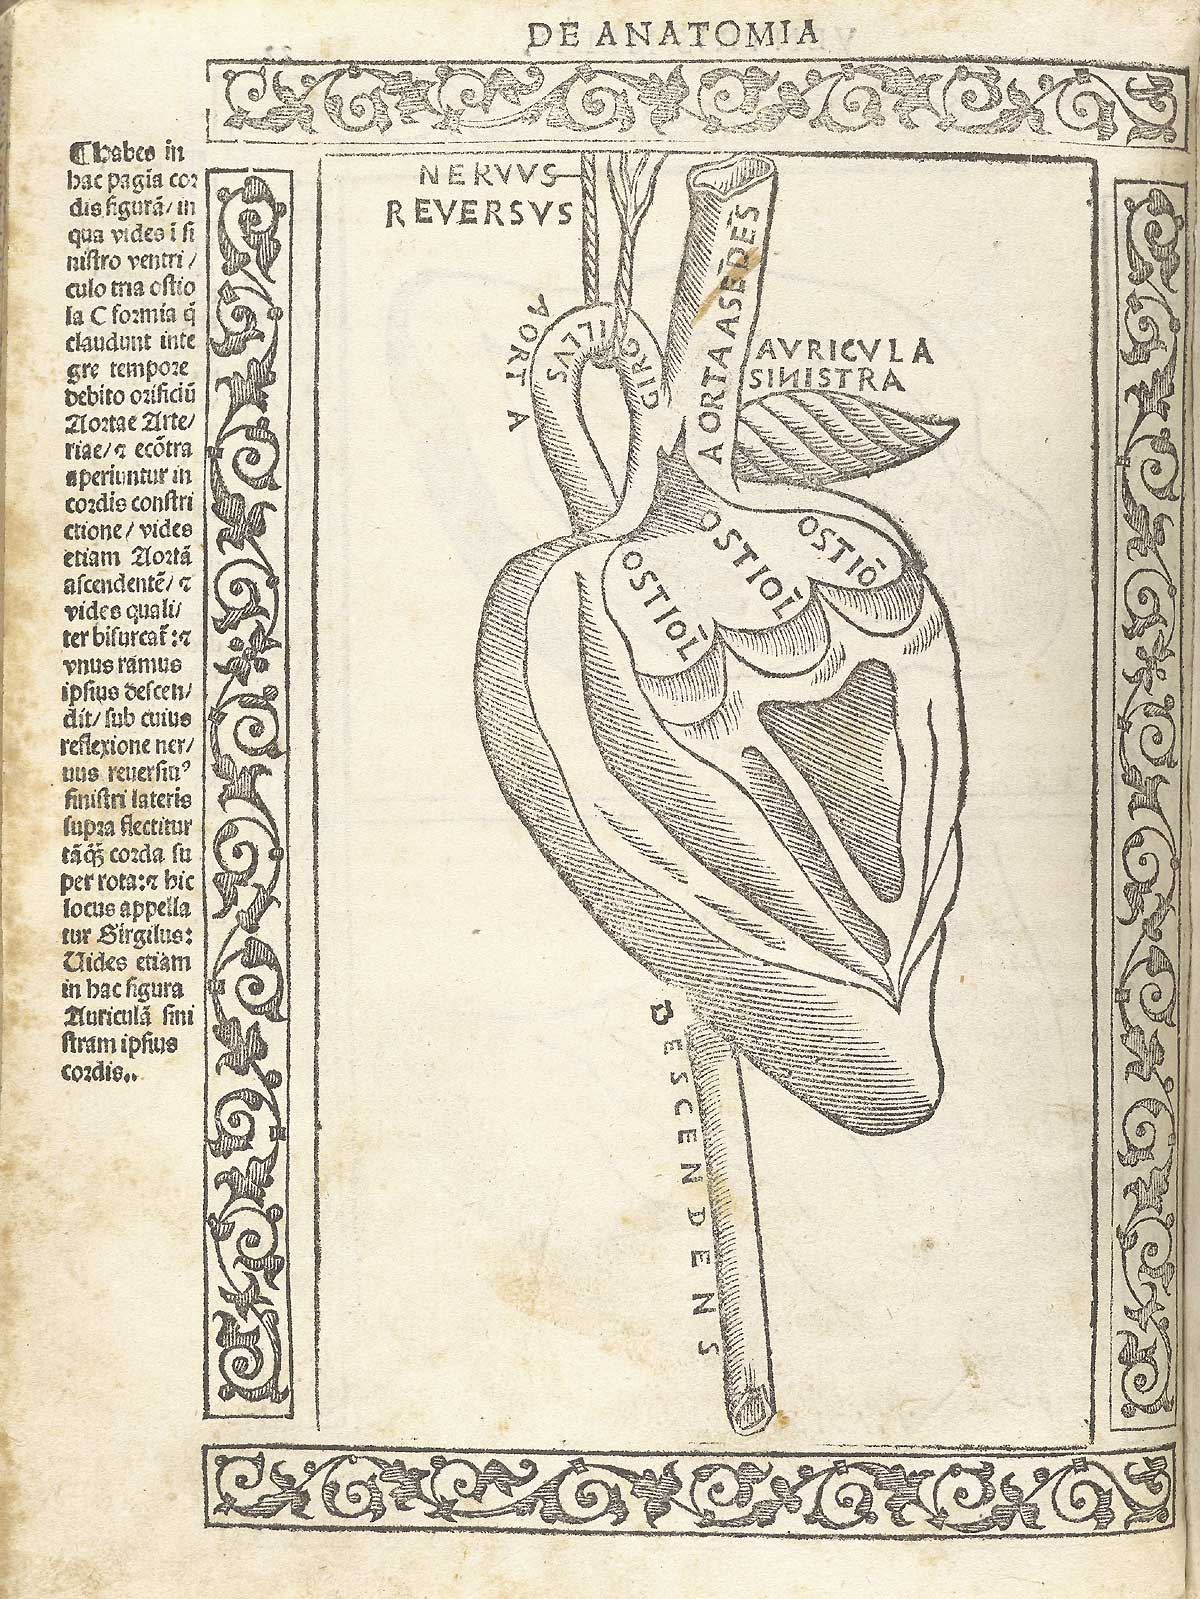 A woodcut of the heart in cross section showing the ventricles and large aorta entering the organ; with a woodcut border and text in Latin on the left side of page, from Berengario da Carpi’s Isagogae breues, Bologna, 1523, NLM Call no. WZ 240 B488i 1523.